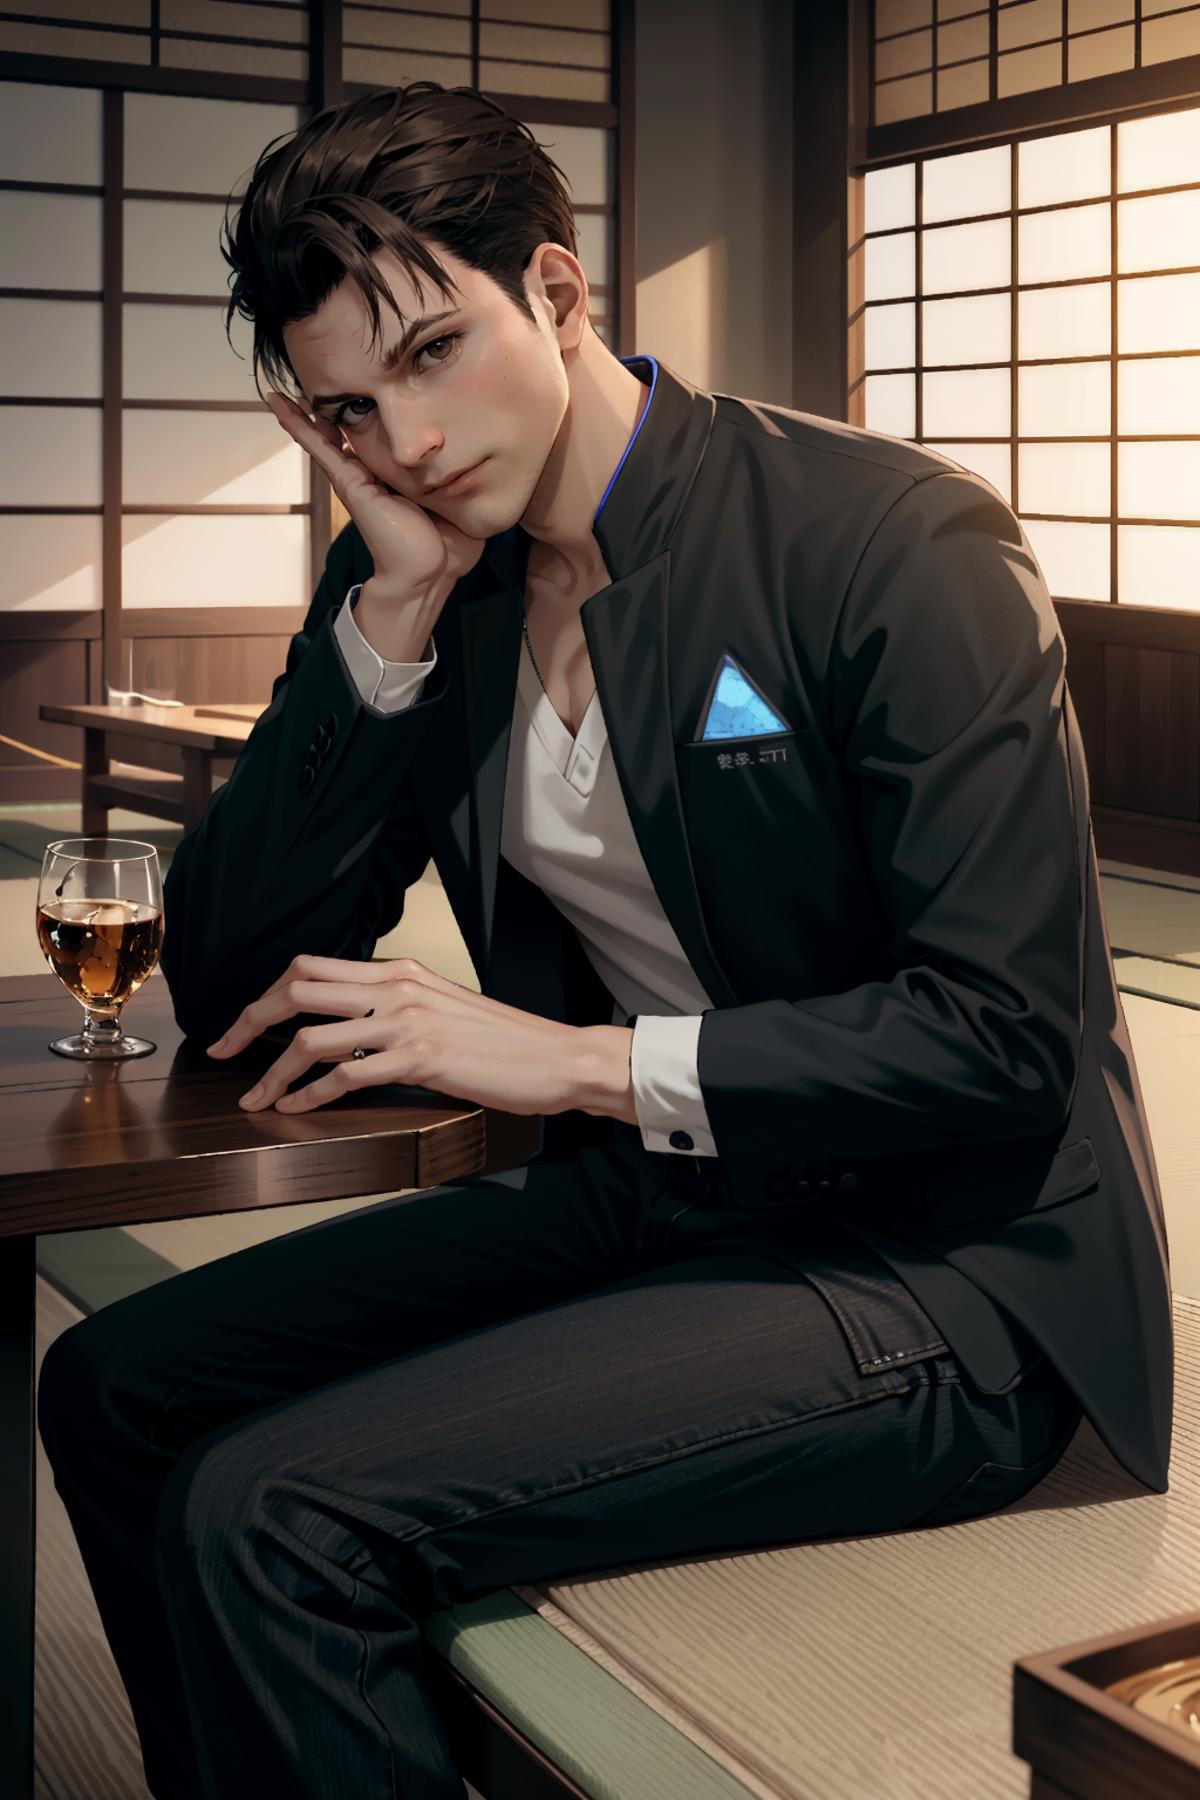 Connor from Detroit: Become Human image by BloodRedKittie